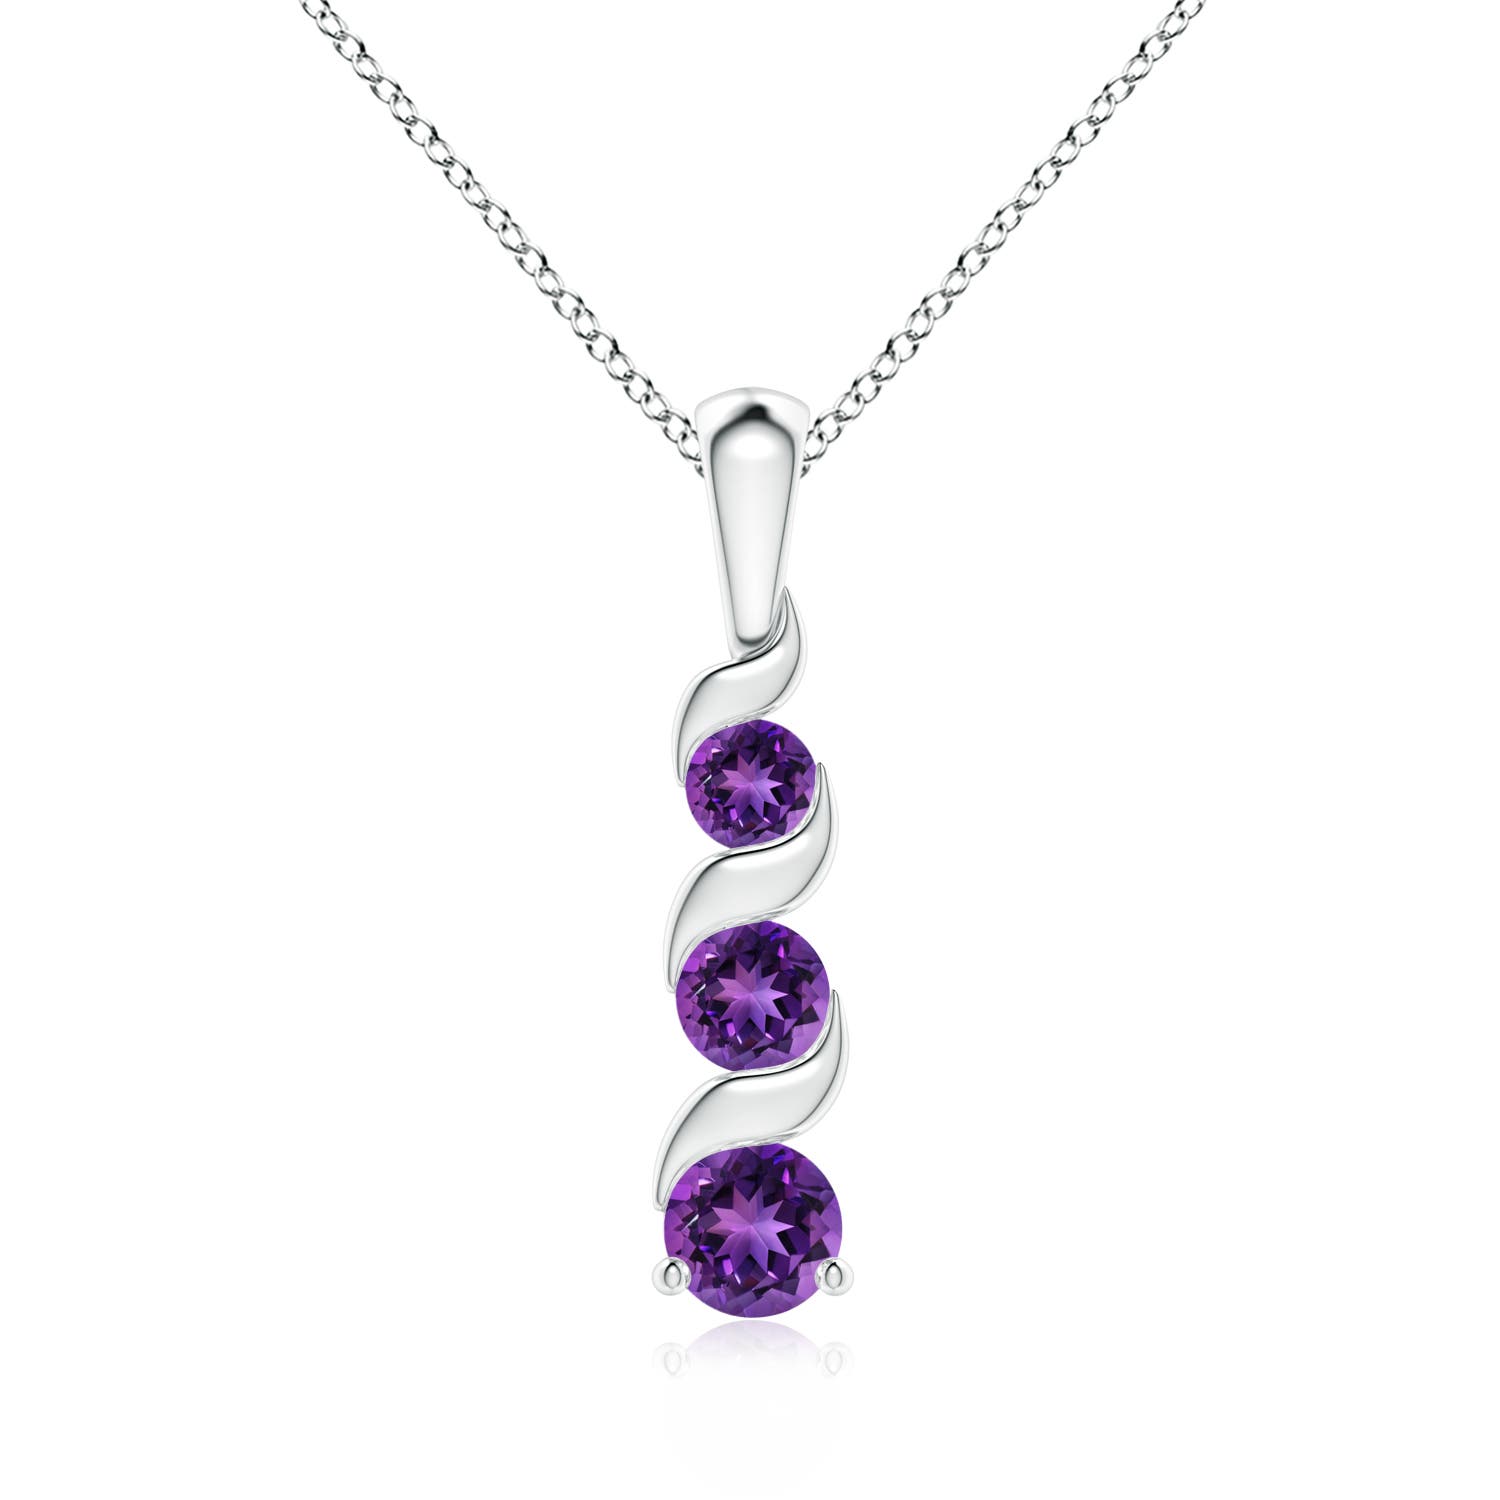 Shop Amethyst Jewelry with Unique Designs | Angara